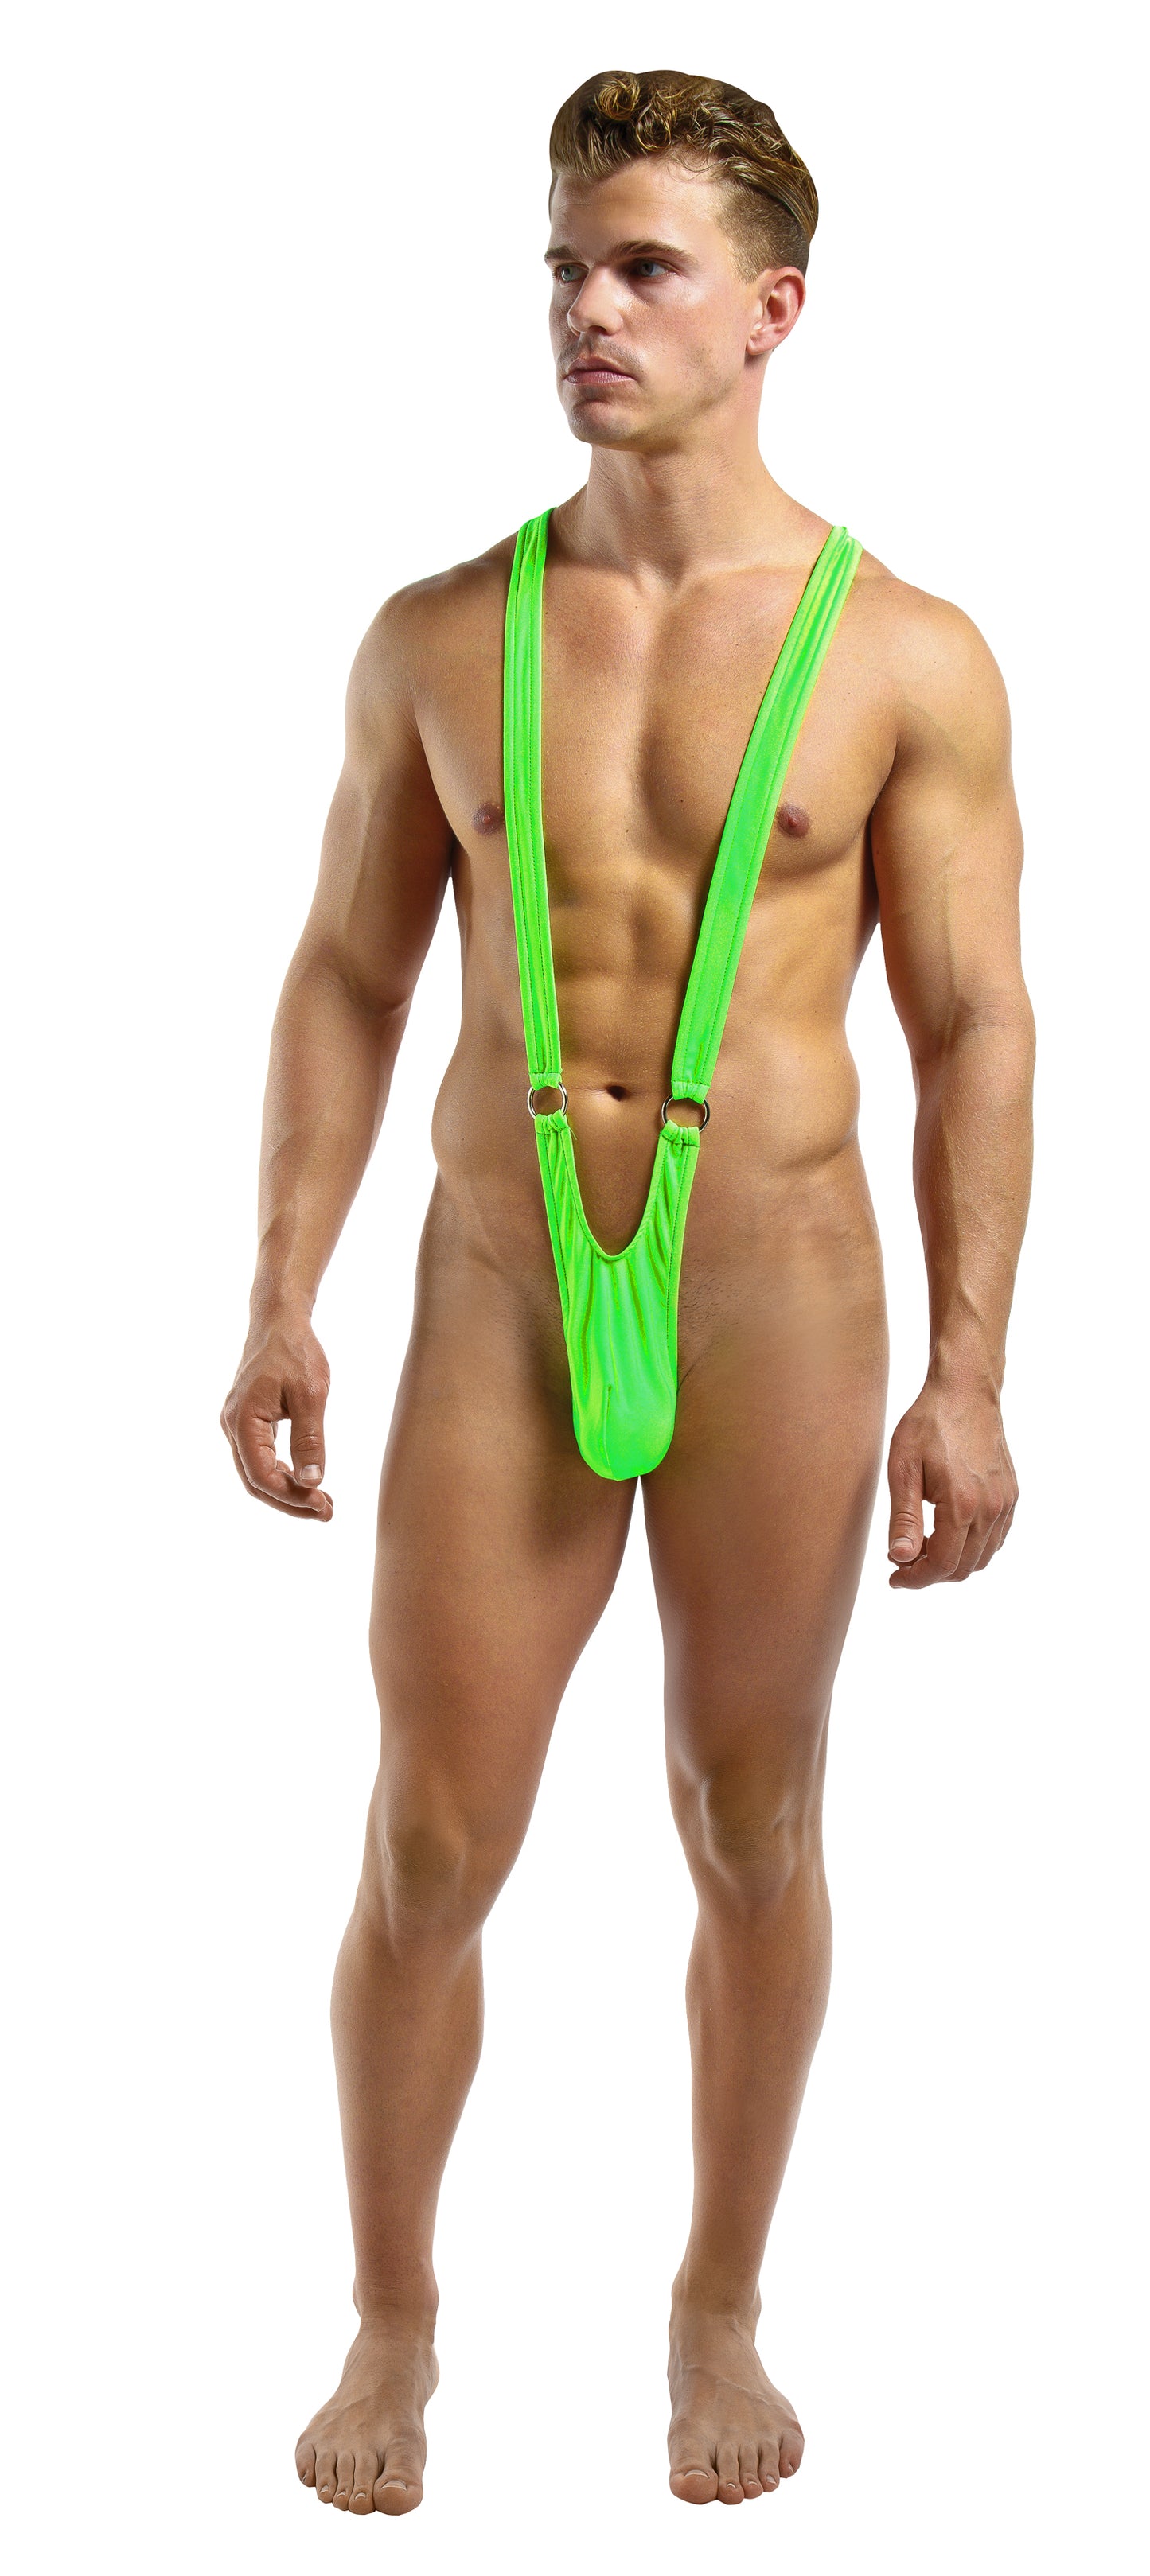 Male Power Sling Front Rings - Just for you desires